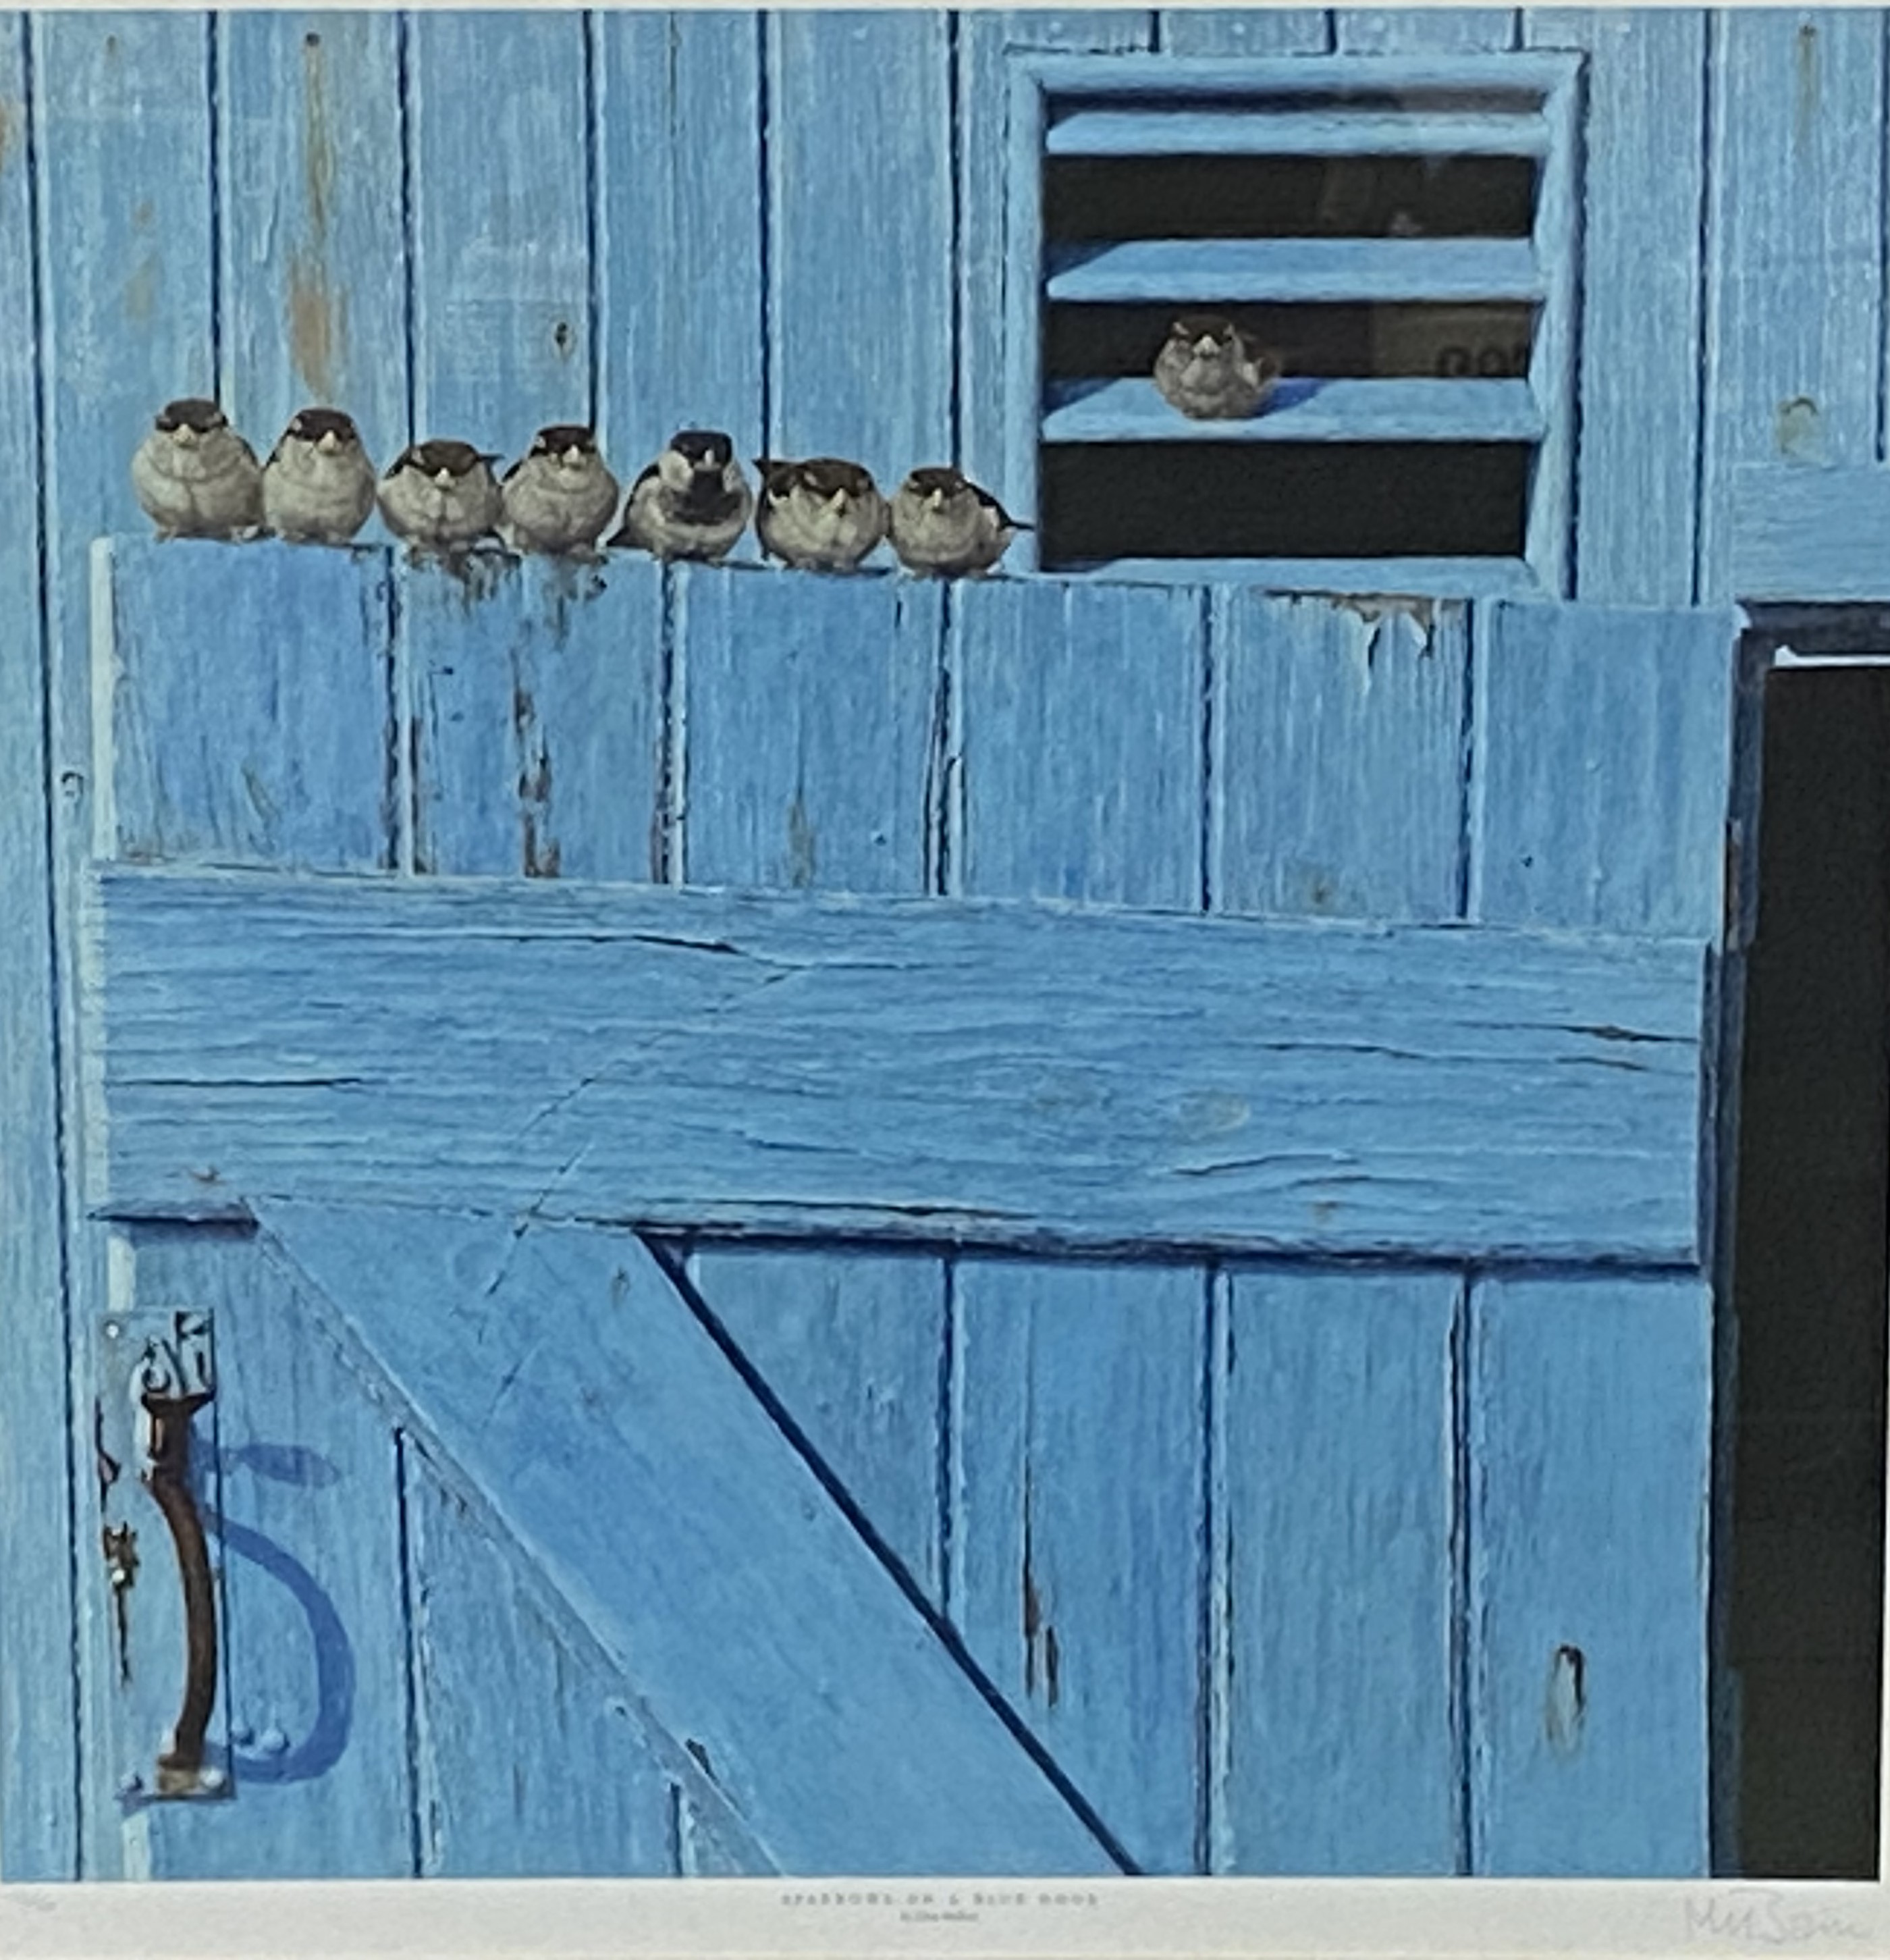 Framed and glazed limited edition lithographic print, Sparrows on a blue door